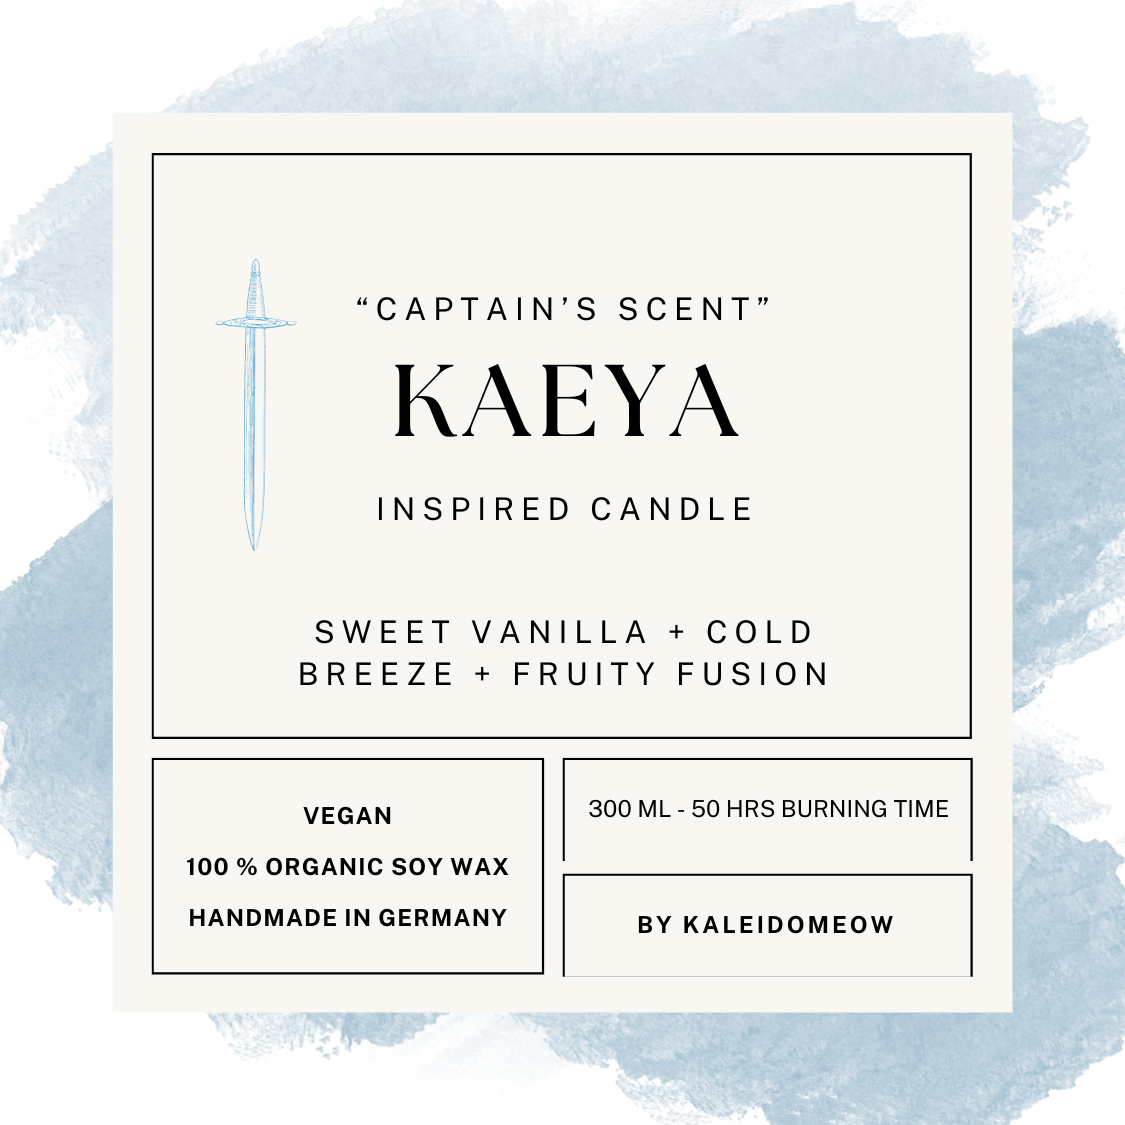 Kaeya inspired candle - 'Captain's Scent' Genshin Impact inspired Candle 300 ML